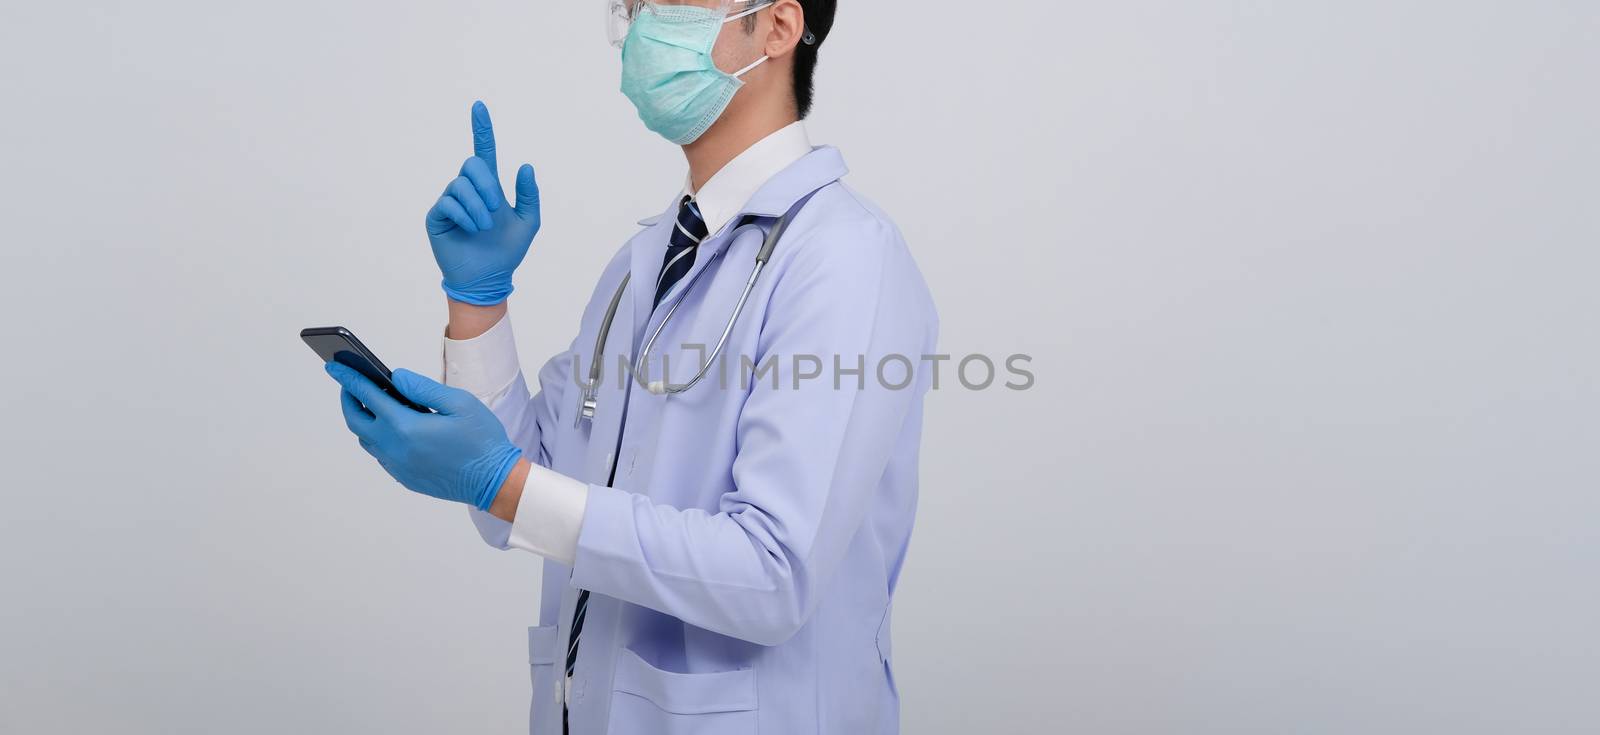 doctor physician practitioner wearing mask with smartphone & stethoscope on white background. medical professional medicine healthcare concept